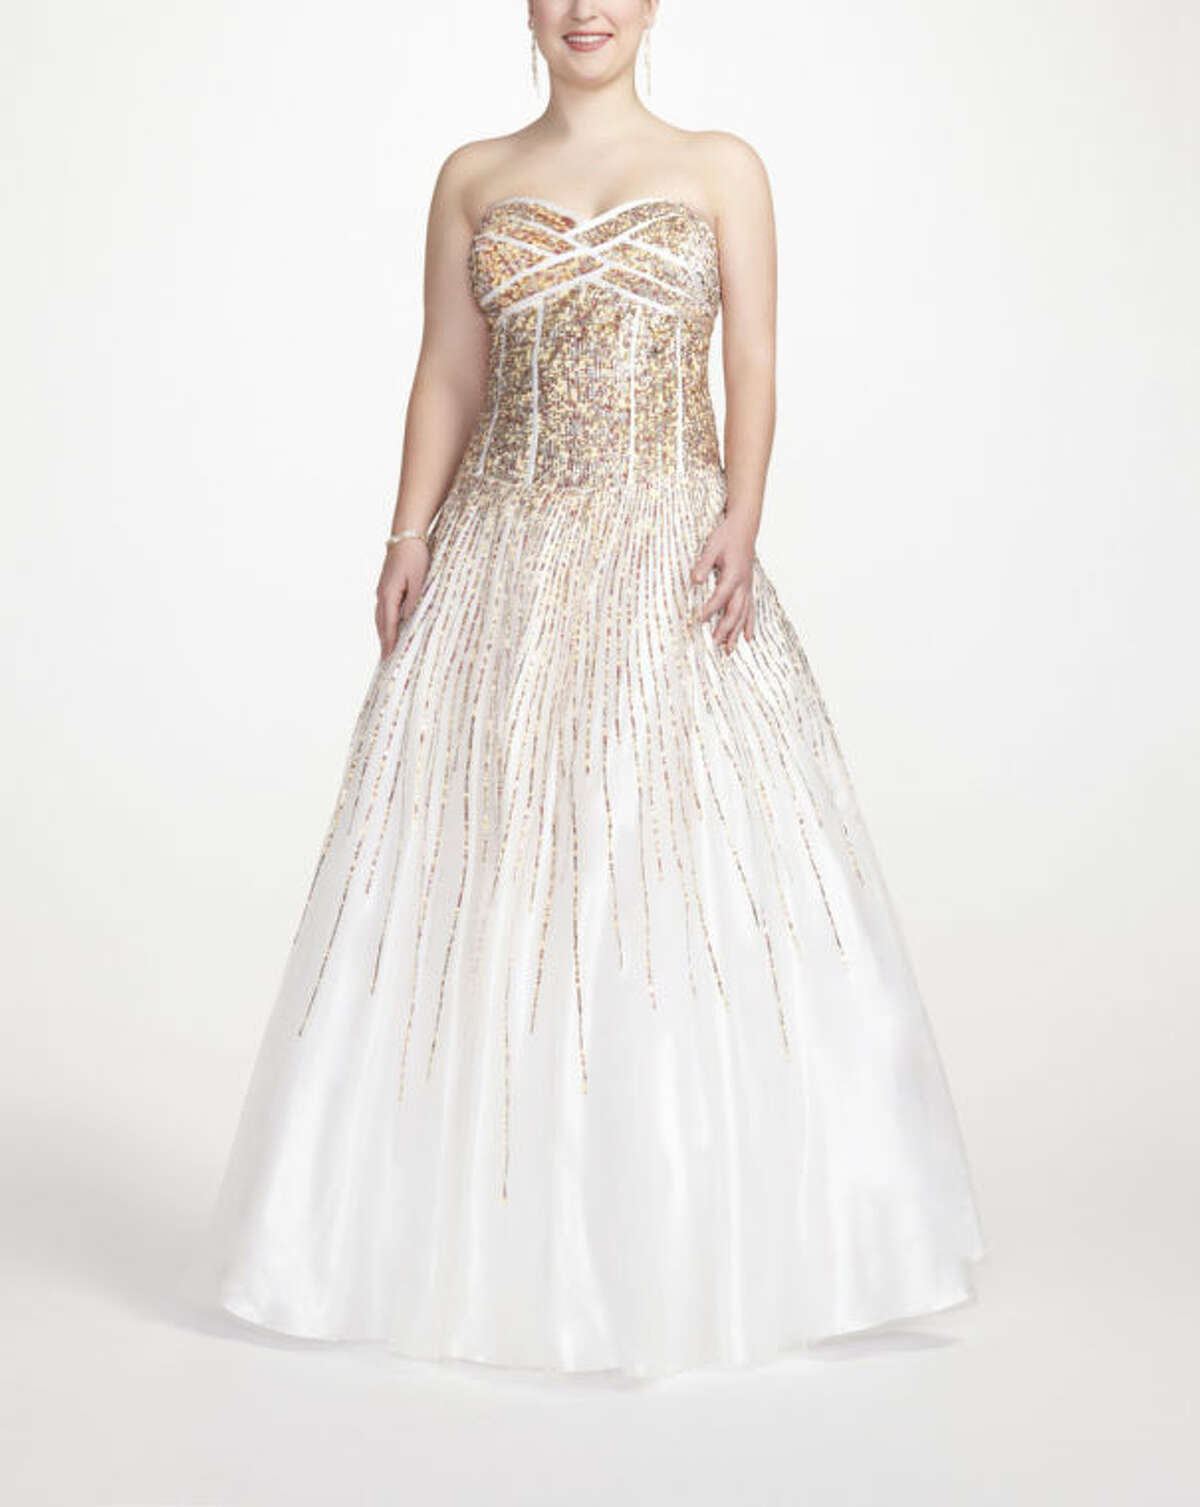 This undated image released by David's Bridal shows a popular prom gown design offered at David's Bridal. Clothes shopping for plus-size teens can be frustrating in general, but shopping for a dream prom dress can be a tear-inducing, hair-pulling morass of bad design and few options _ especially for girls who want a dress that hugs the body instead of tenting it. (AP Photo/David's Bridal)